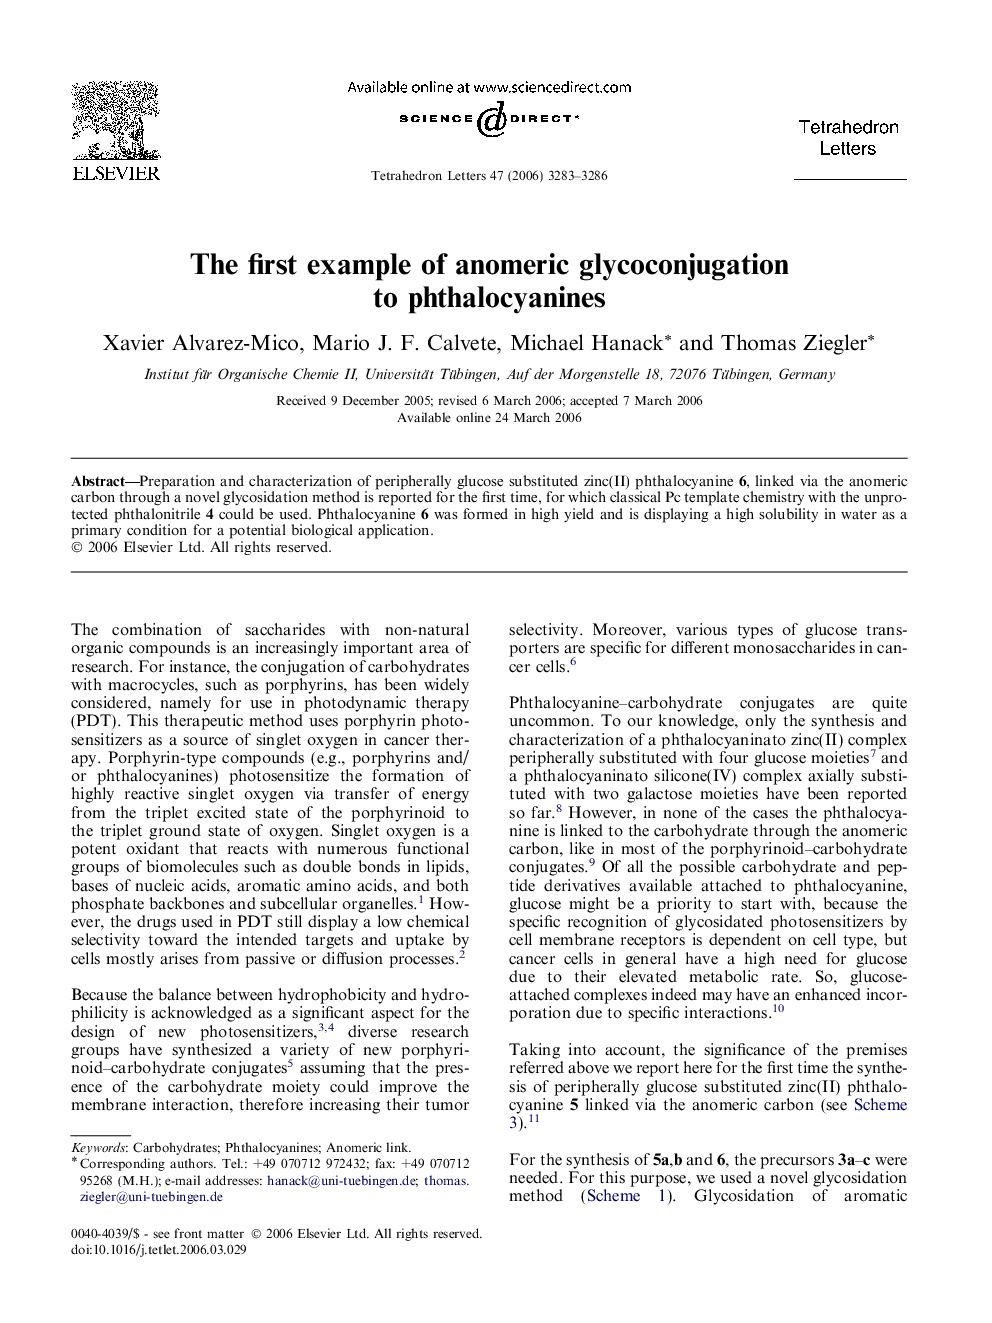 The first example of anomeric glycoconjugation to phthalocyanines